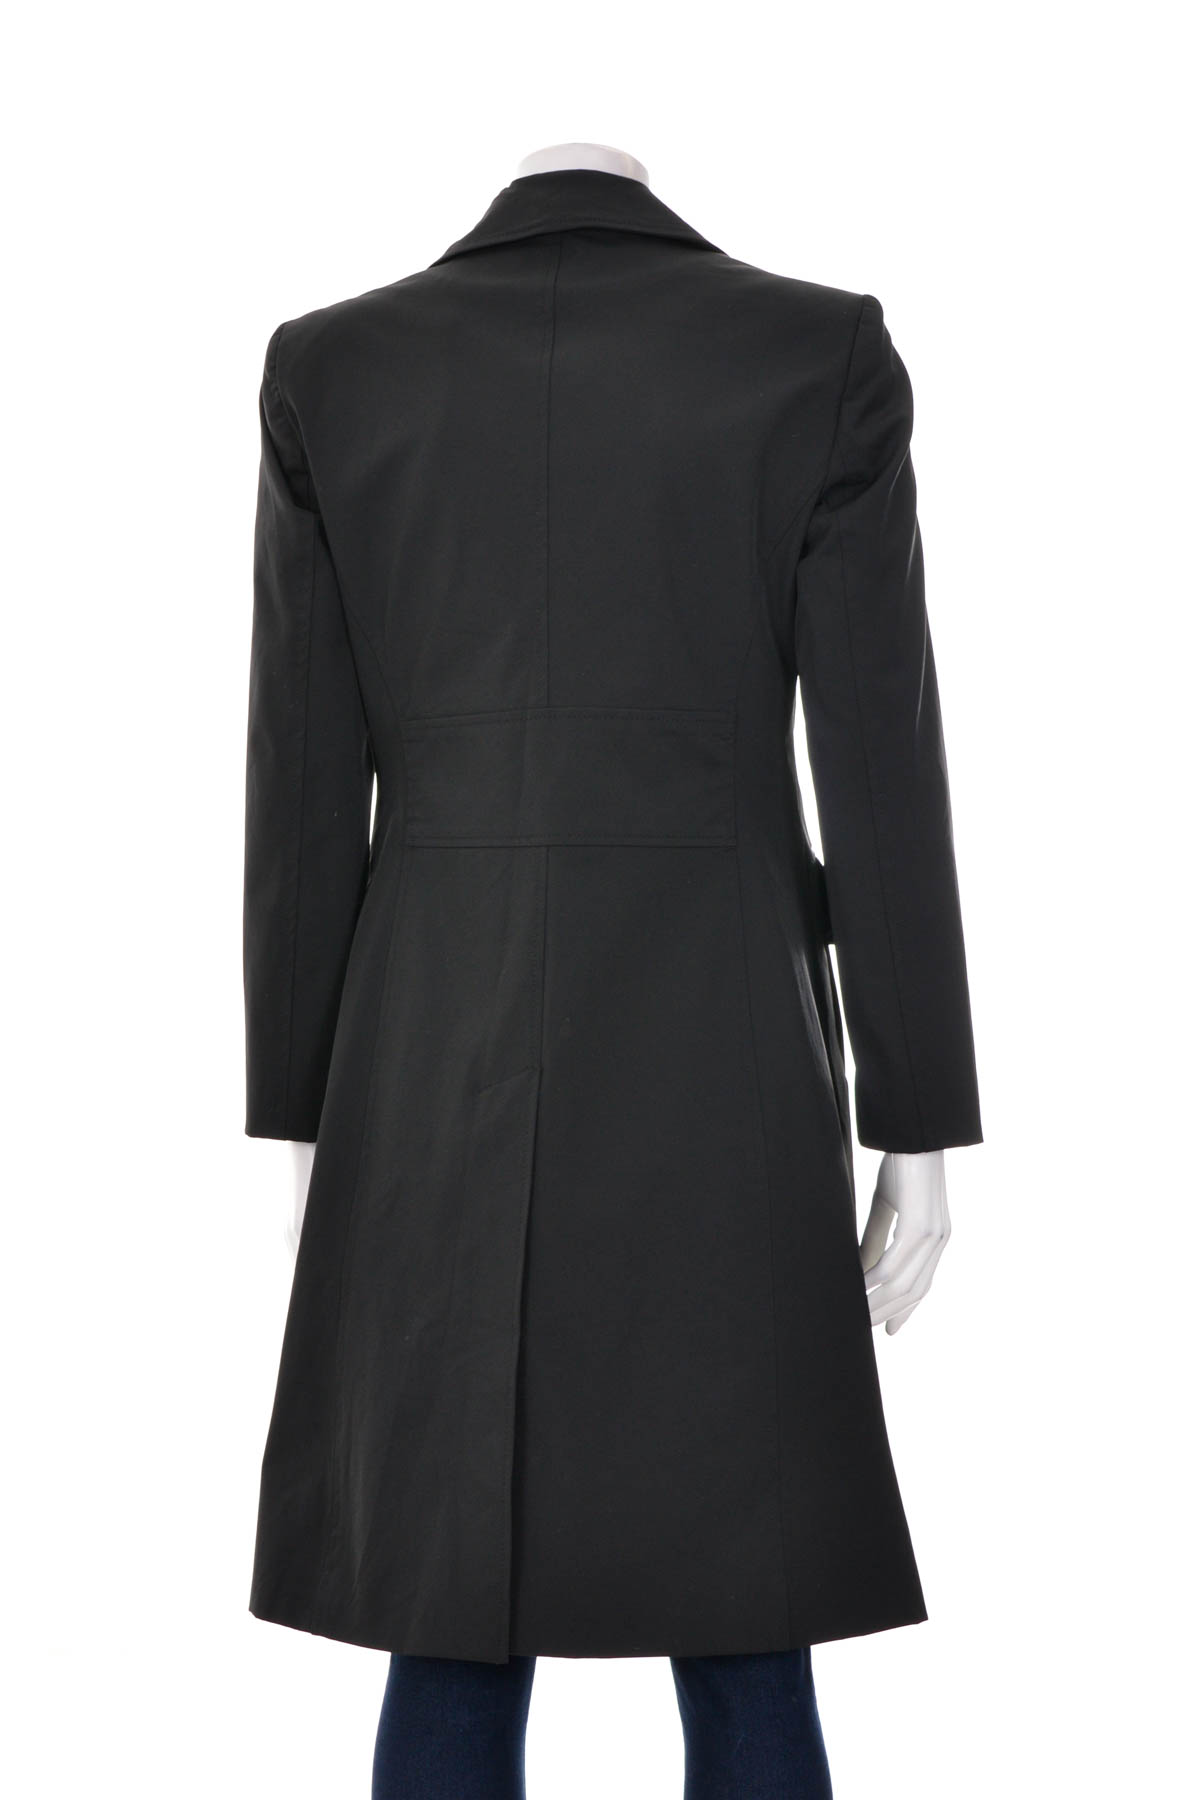 Ladies' Trench Coat - ANN TAYLOR - 1